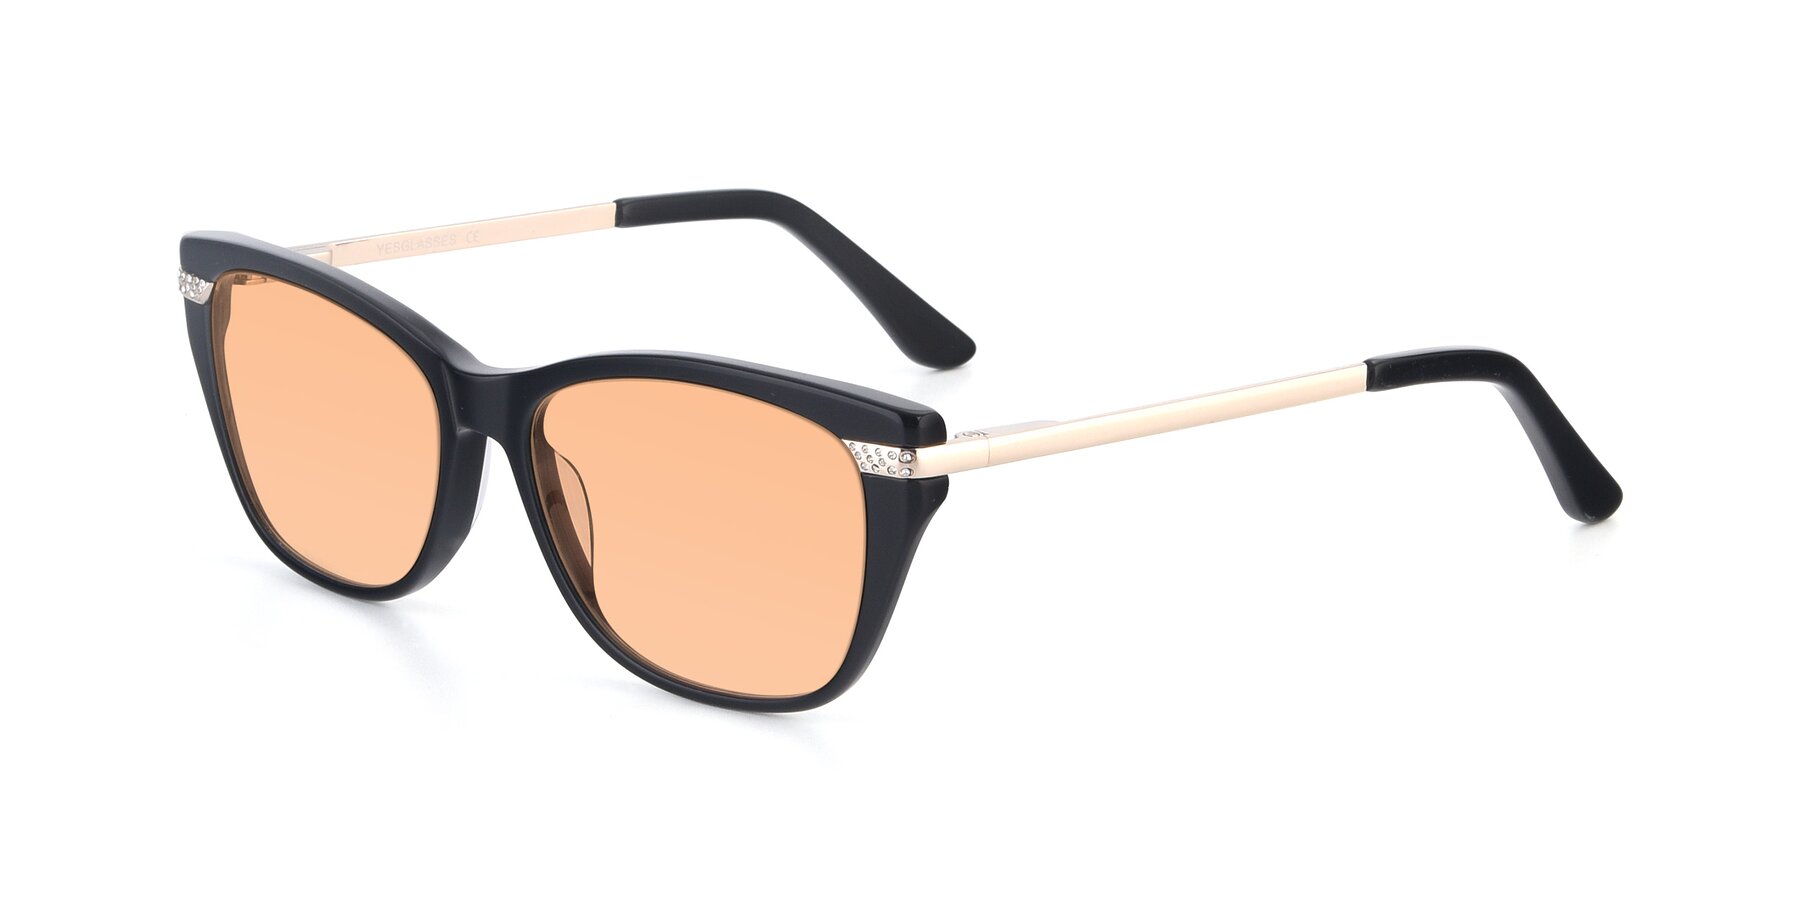 Angle of 17515 in Black with Light Orange Tinted Lenses